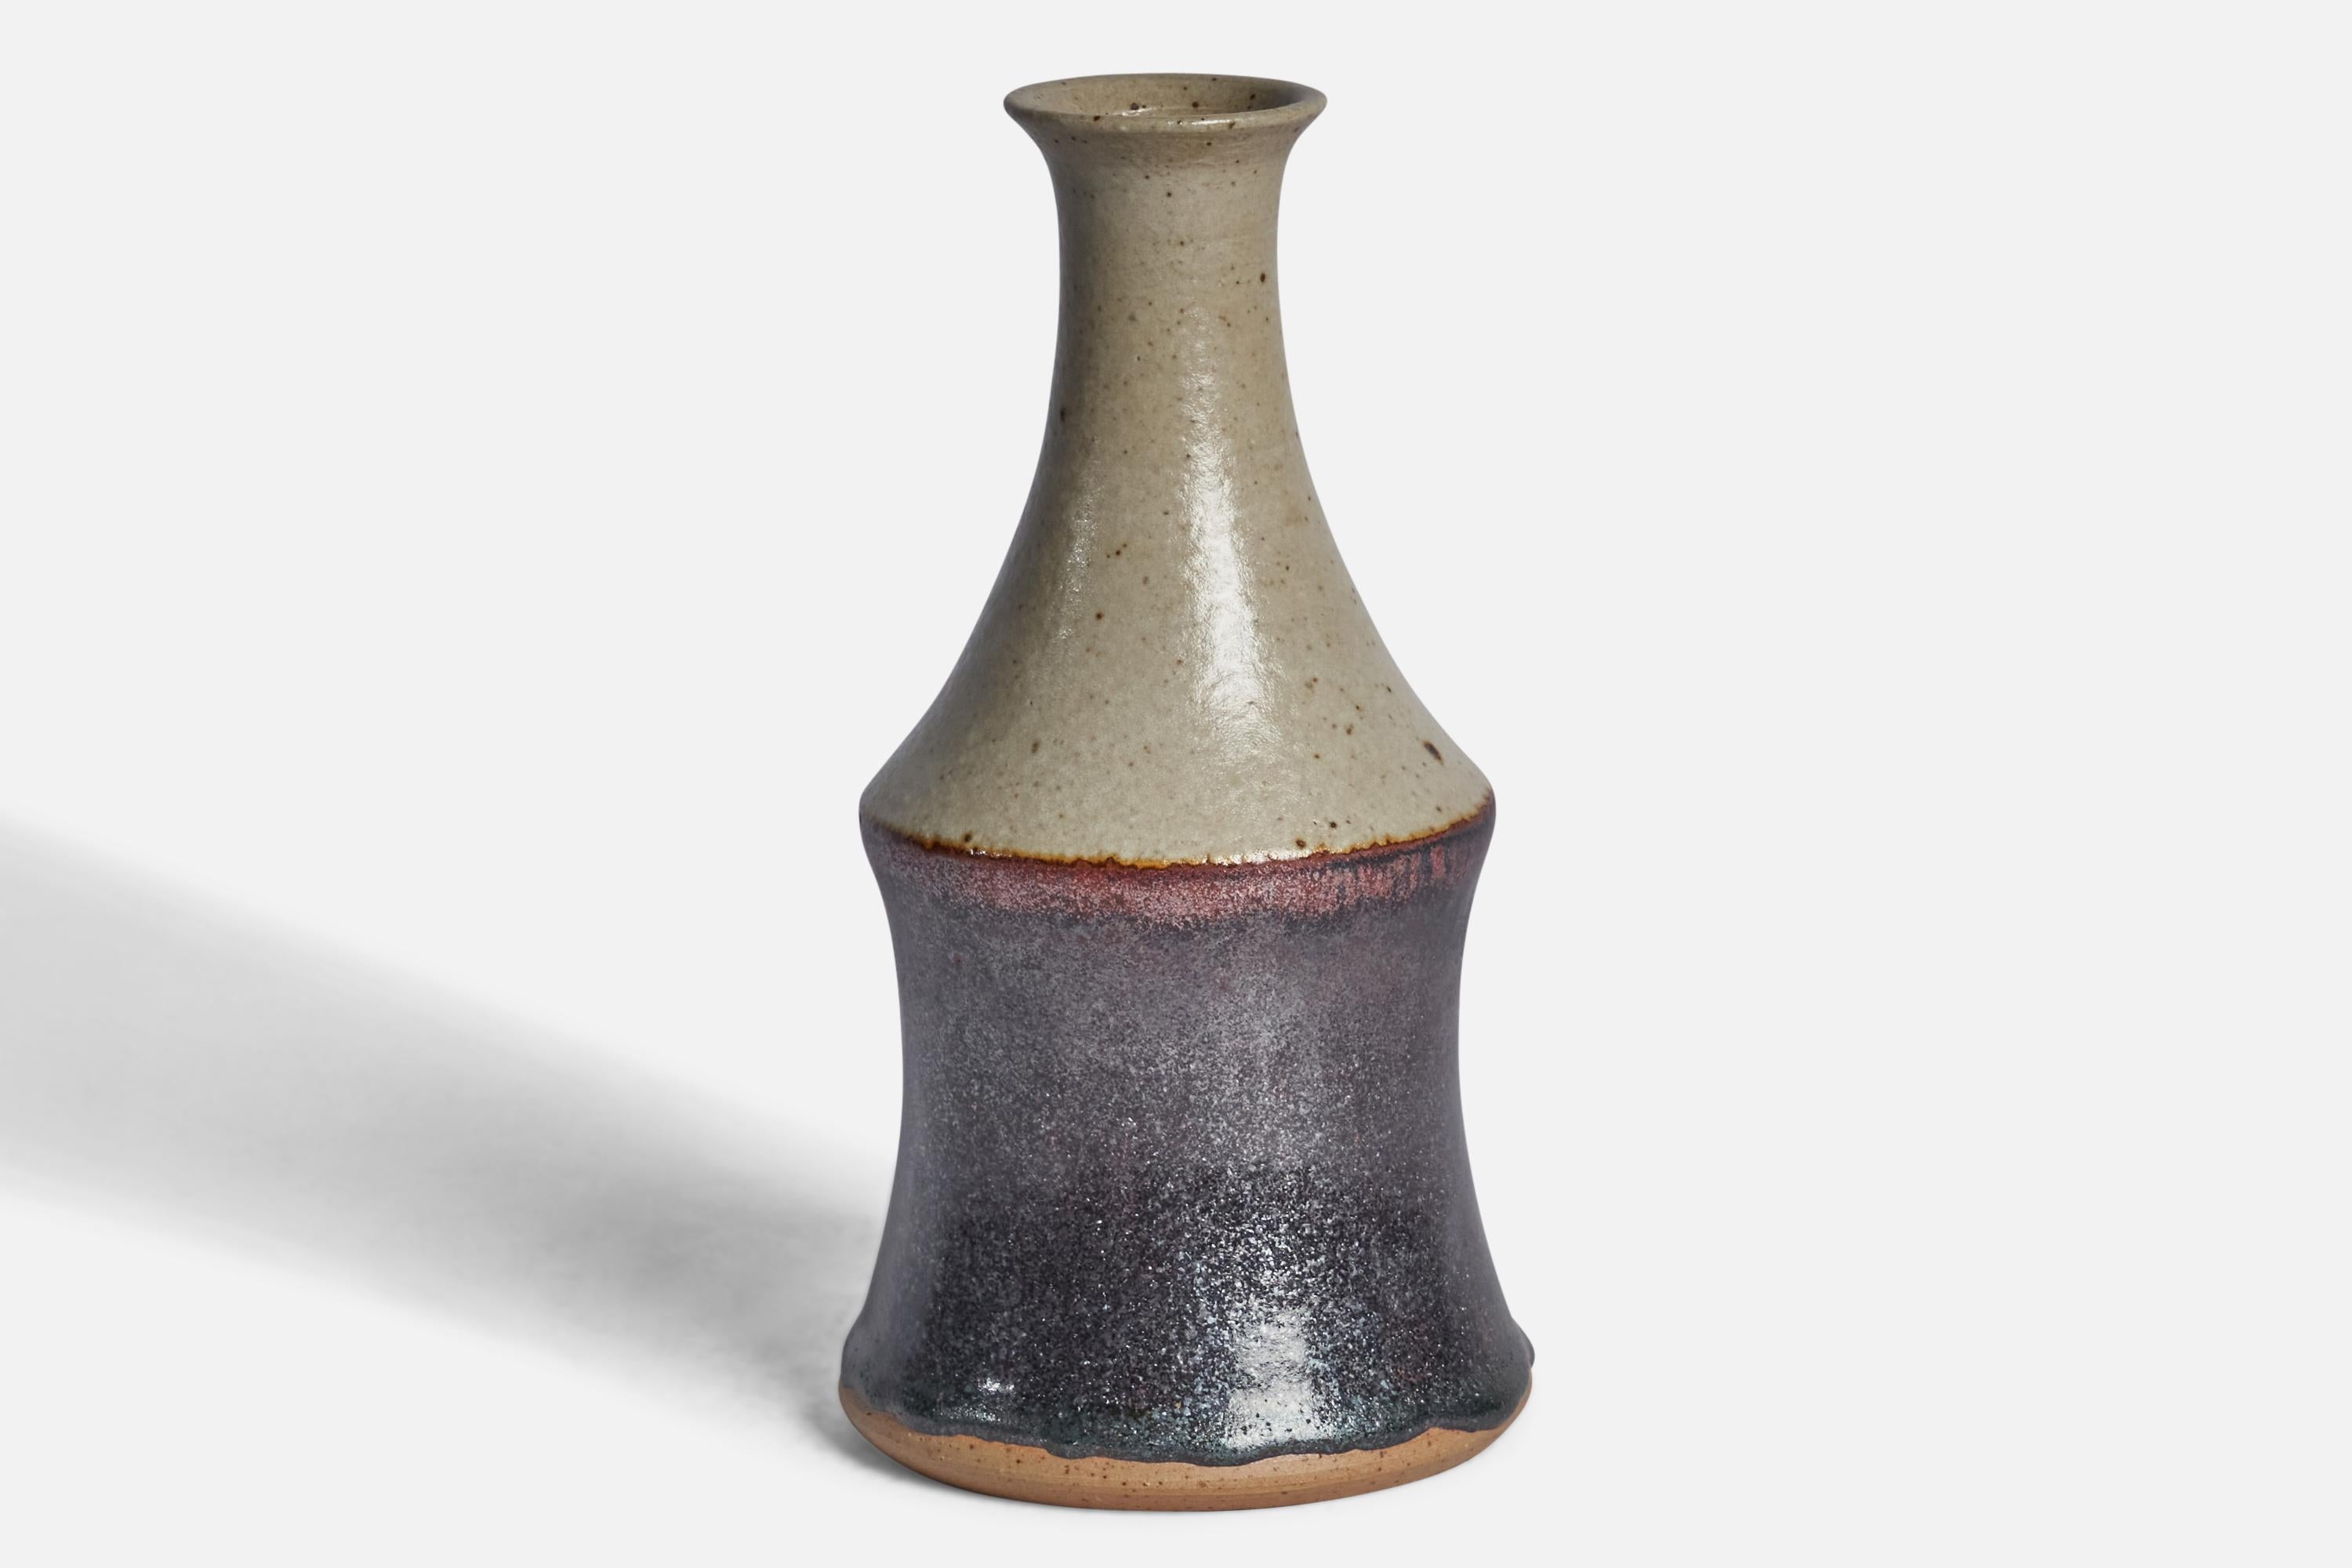 A black and grey-glazed stoneware vase designed and produced by John Andersson and produced by Höganäs, Sweden, 1960s.